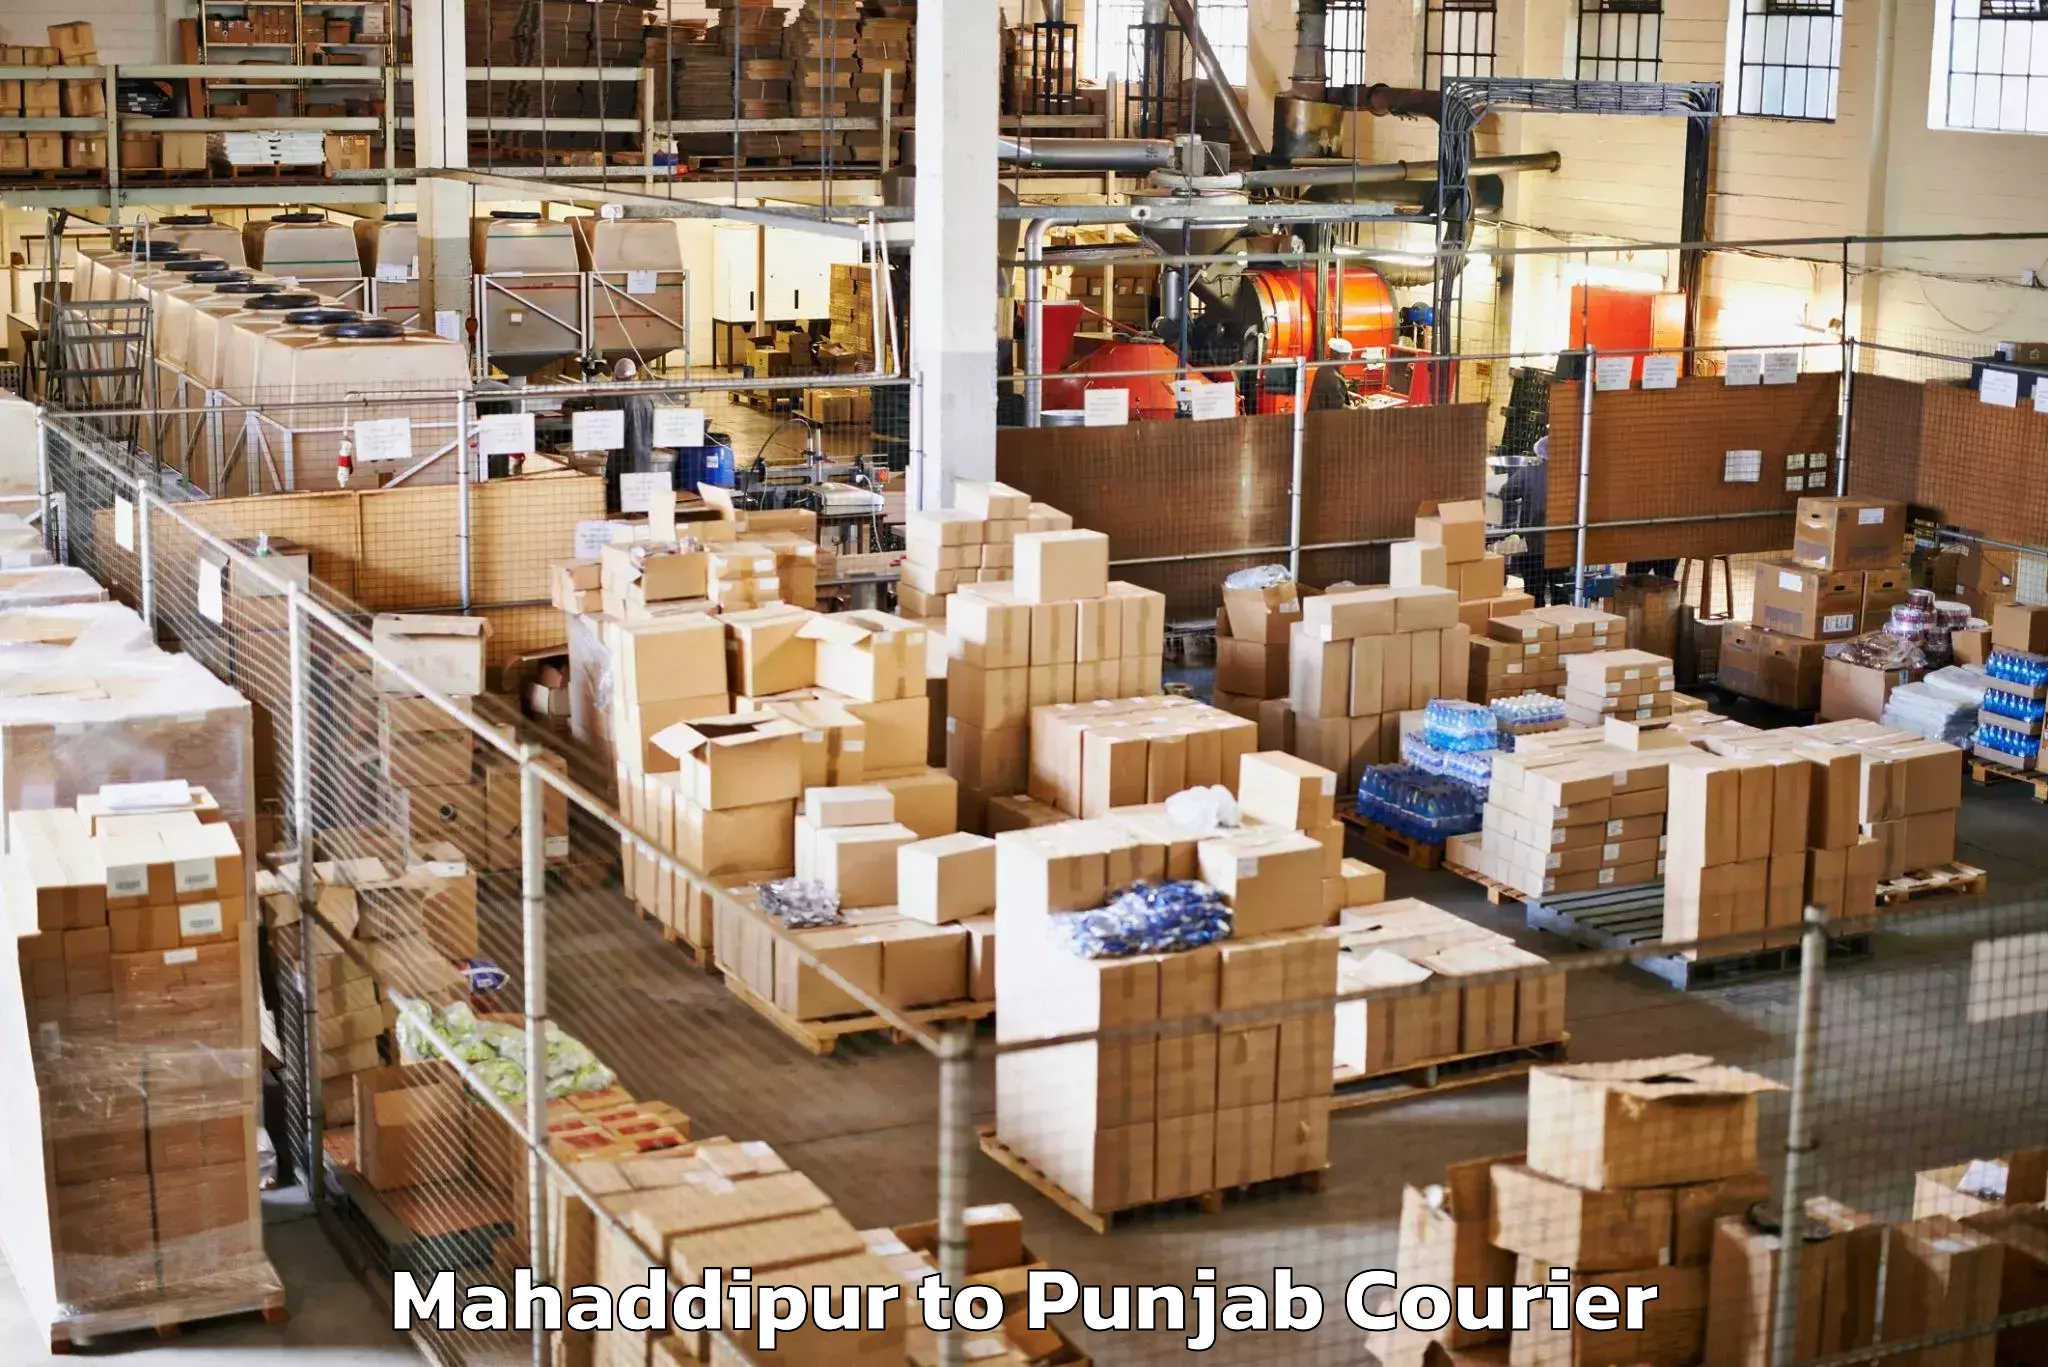 Baggage shipping schedule in Mahaddipur to Patiala